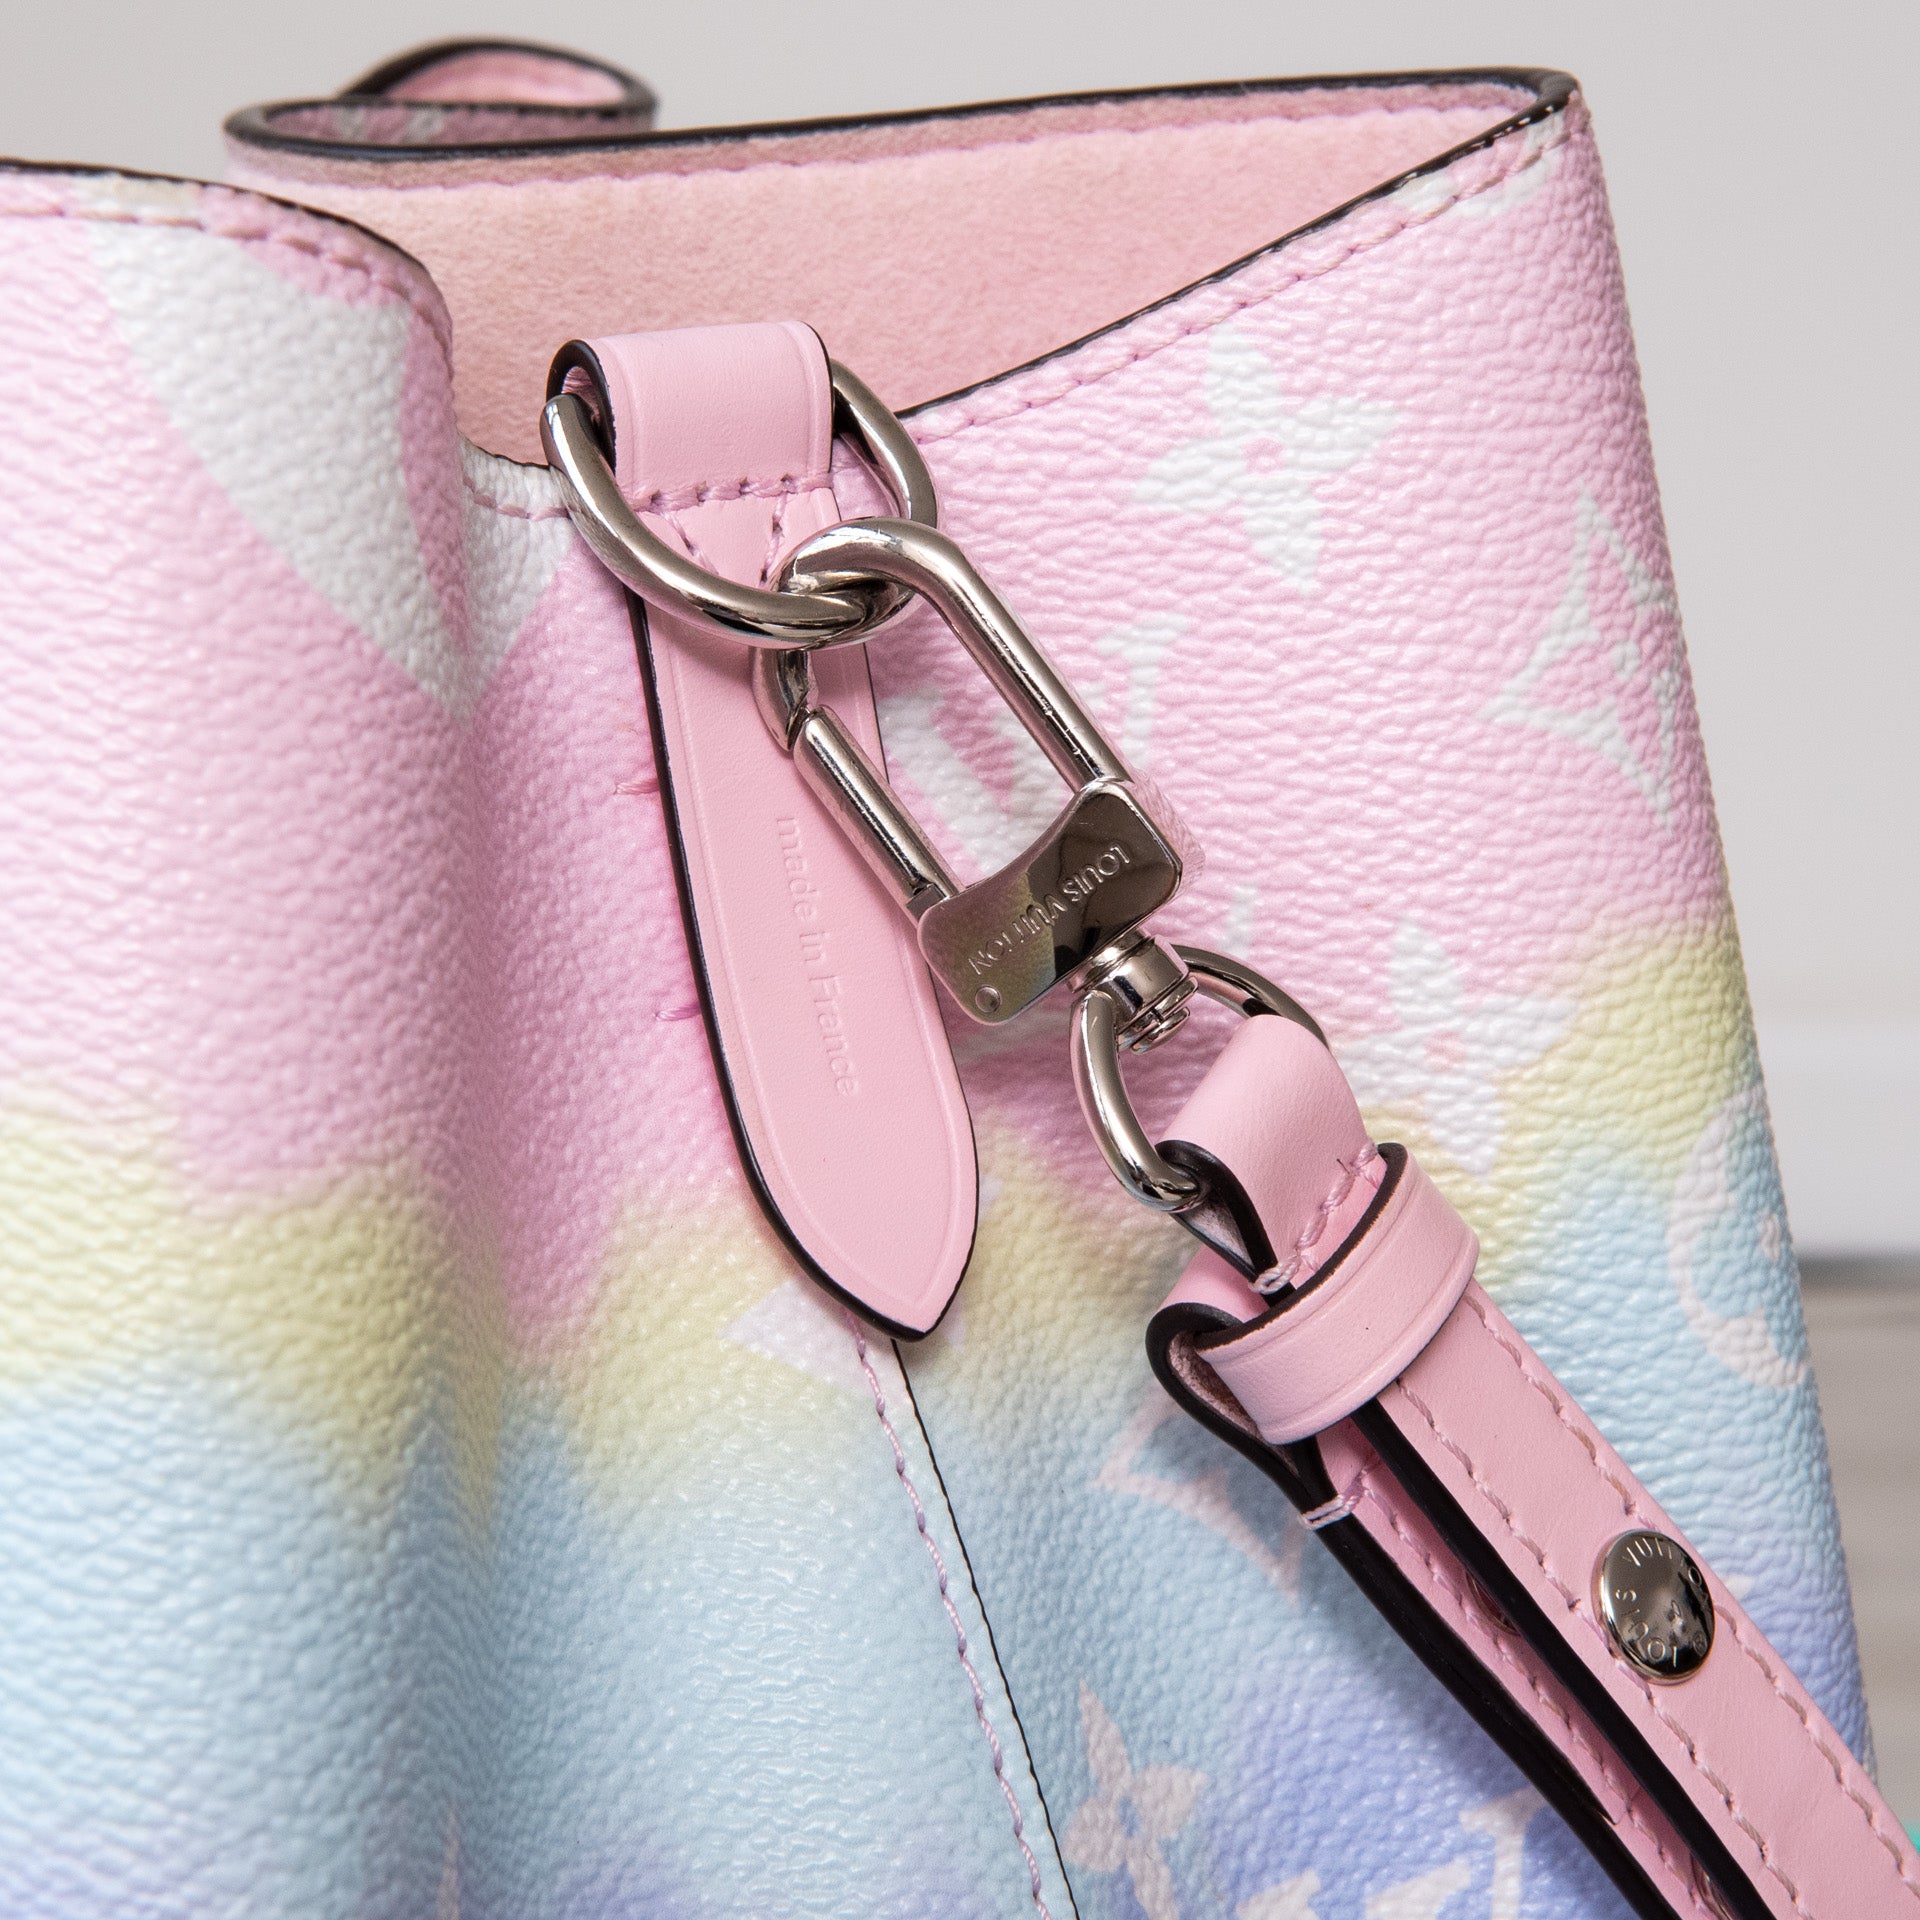 Louis Vuitton Limited Edition Neo Noe Pastel Bag - Image 8 of 12